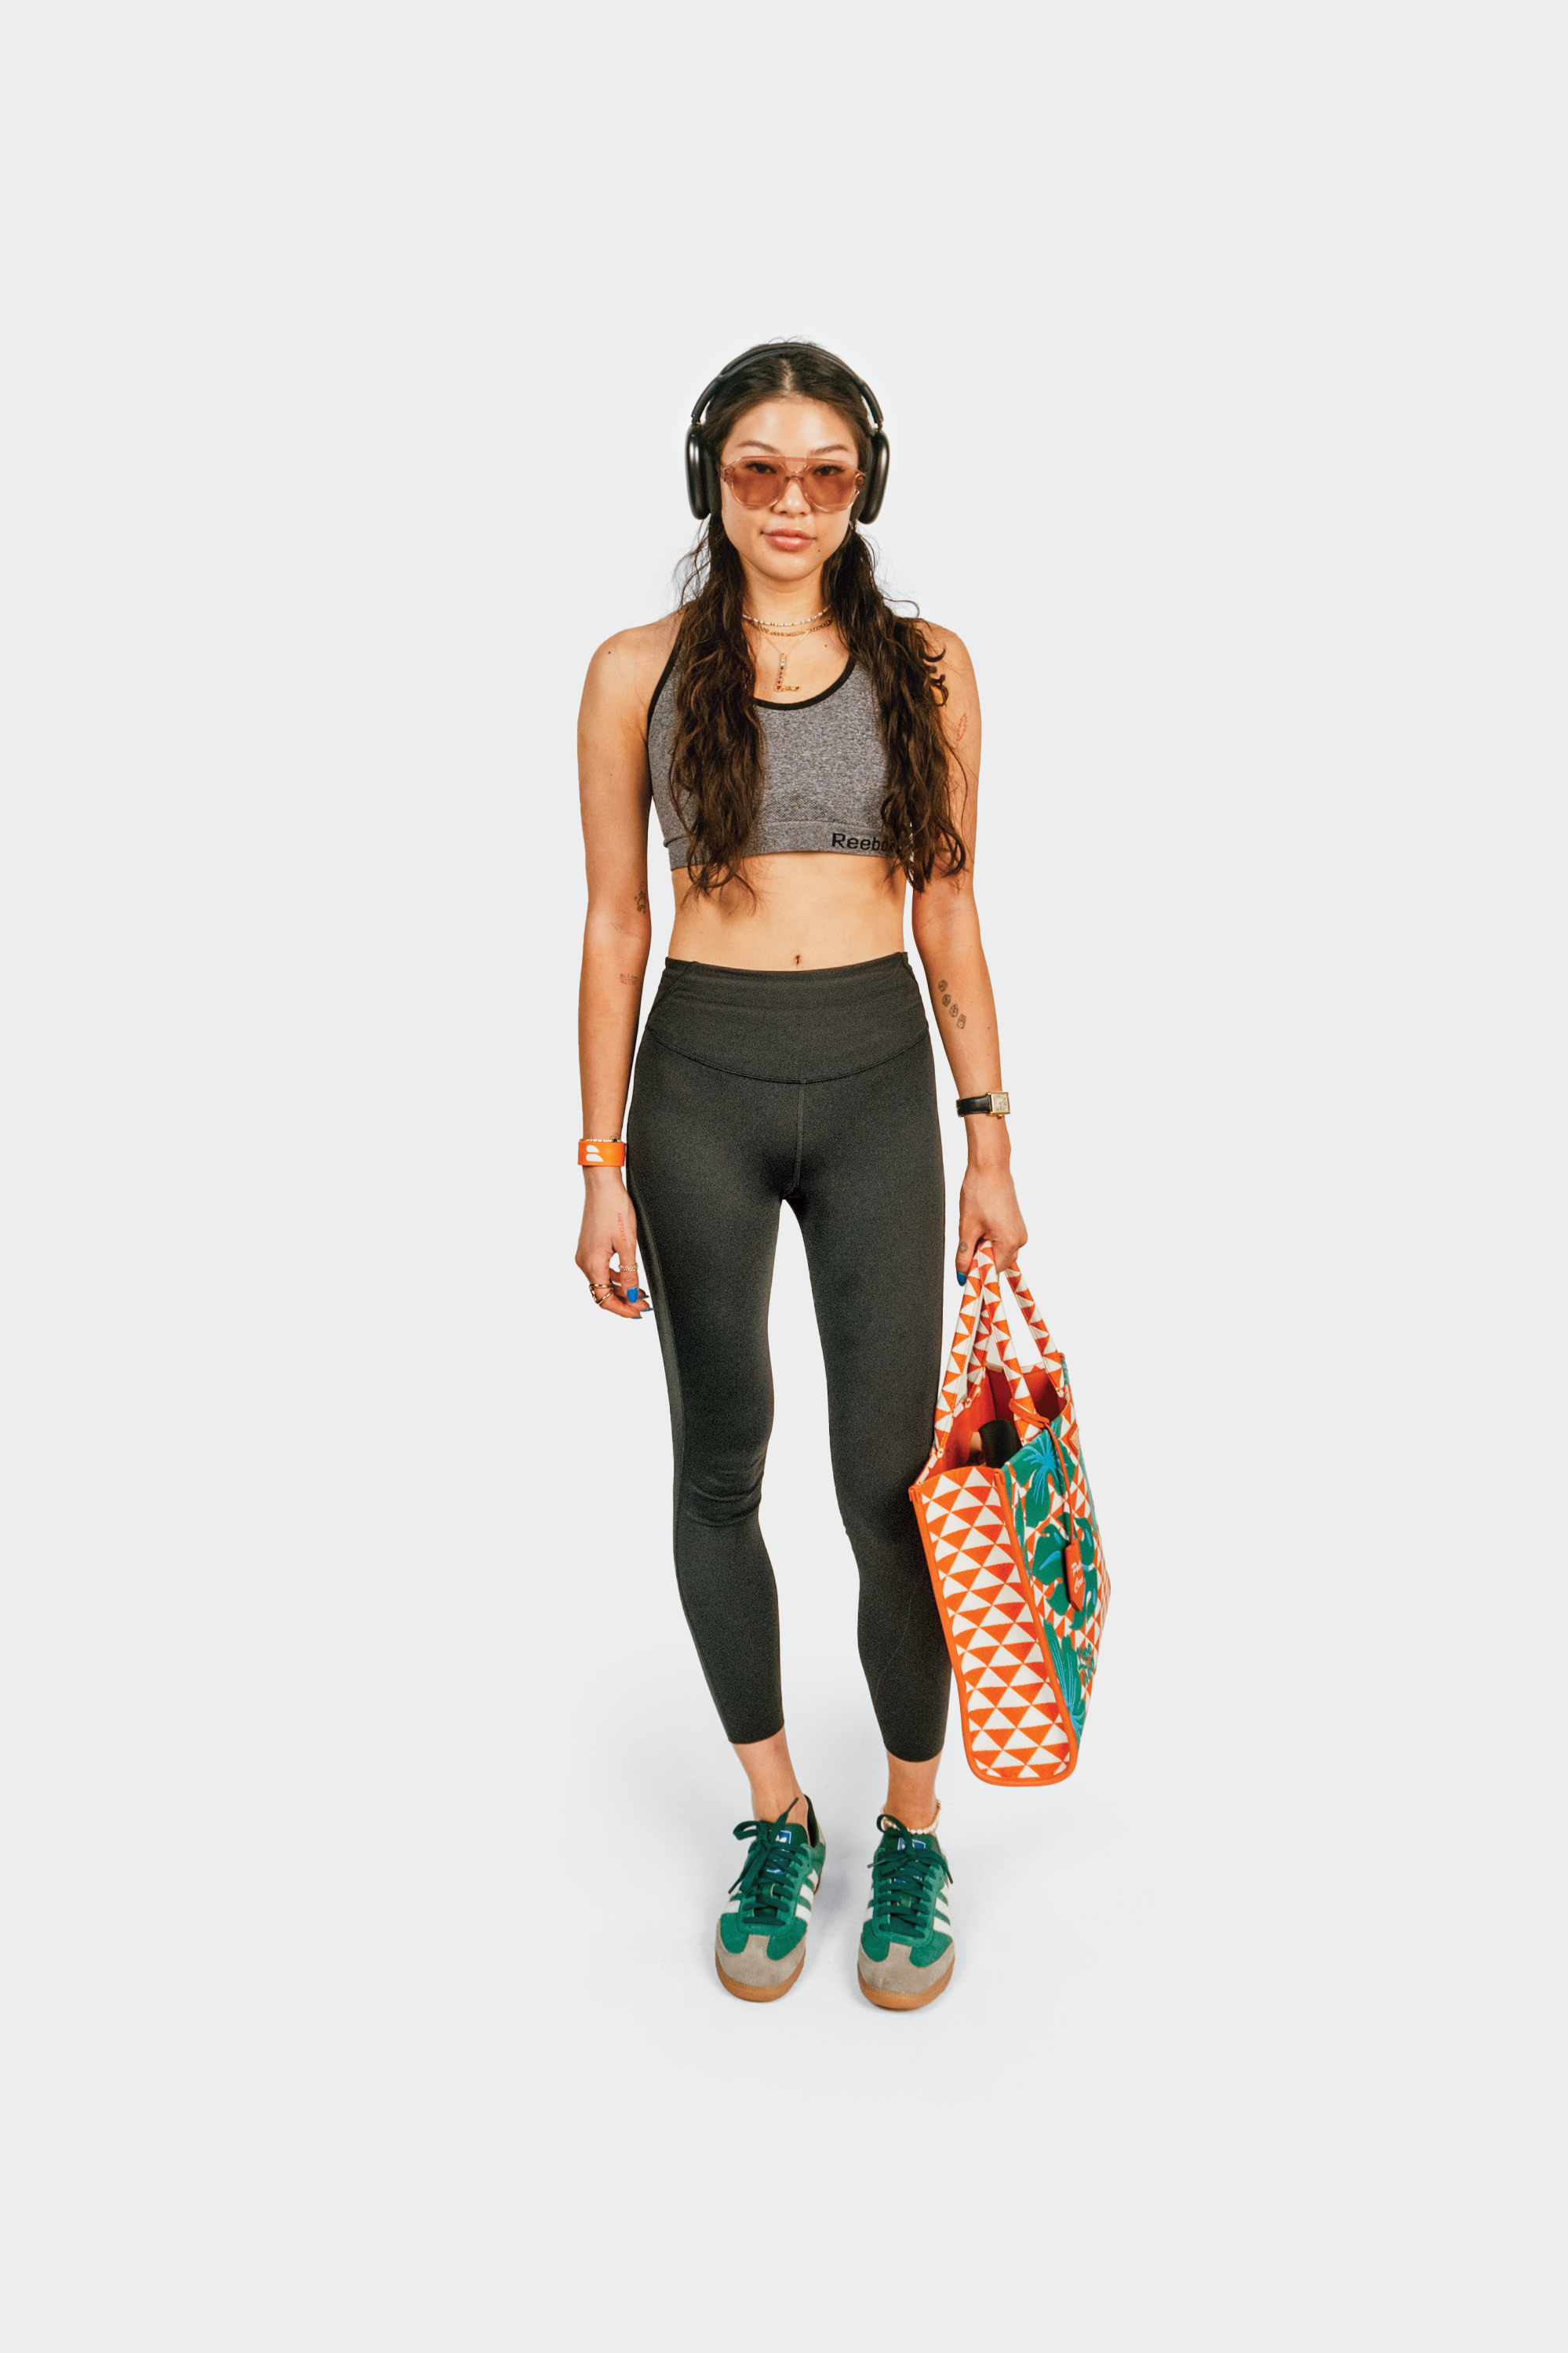 Gina Tricot - Get into workout mode with some new gym gear. Shop season  news here